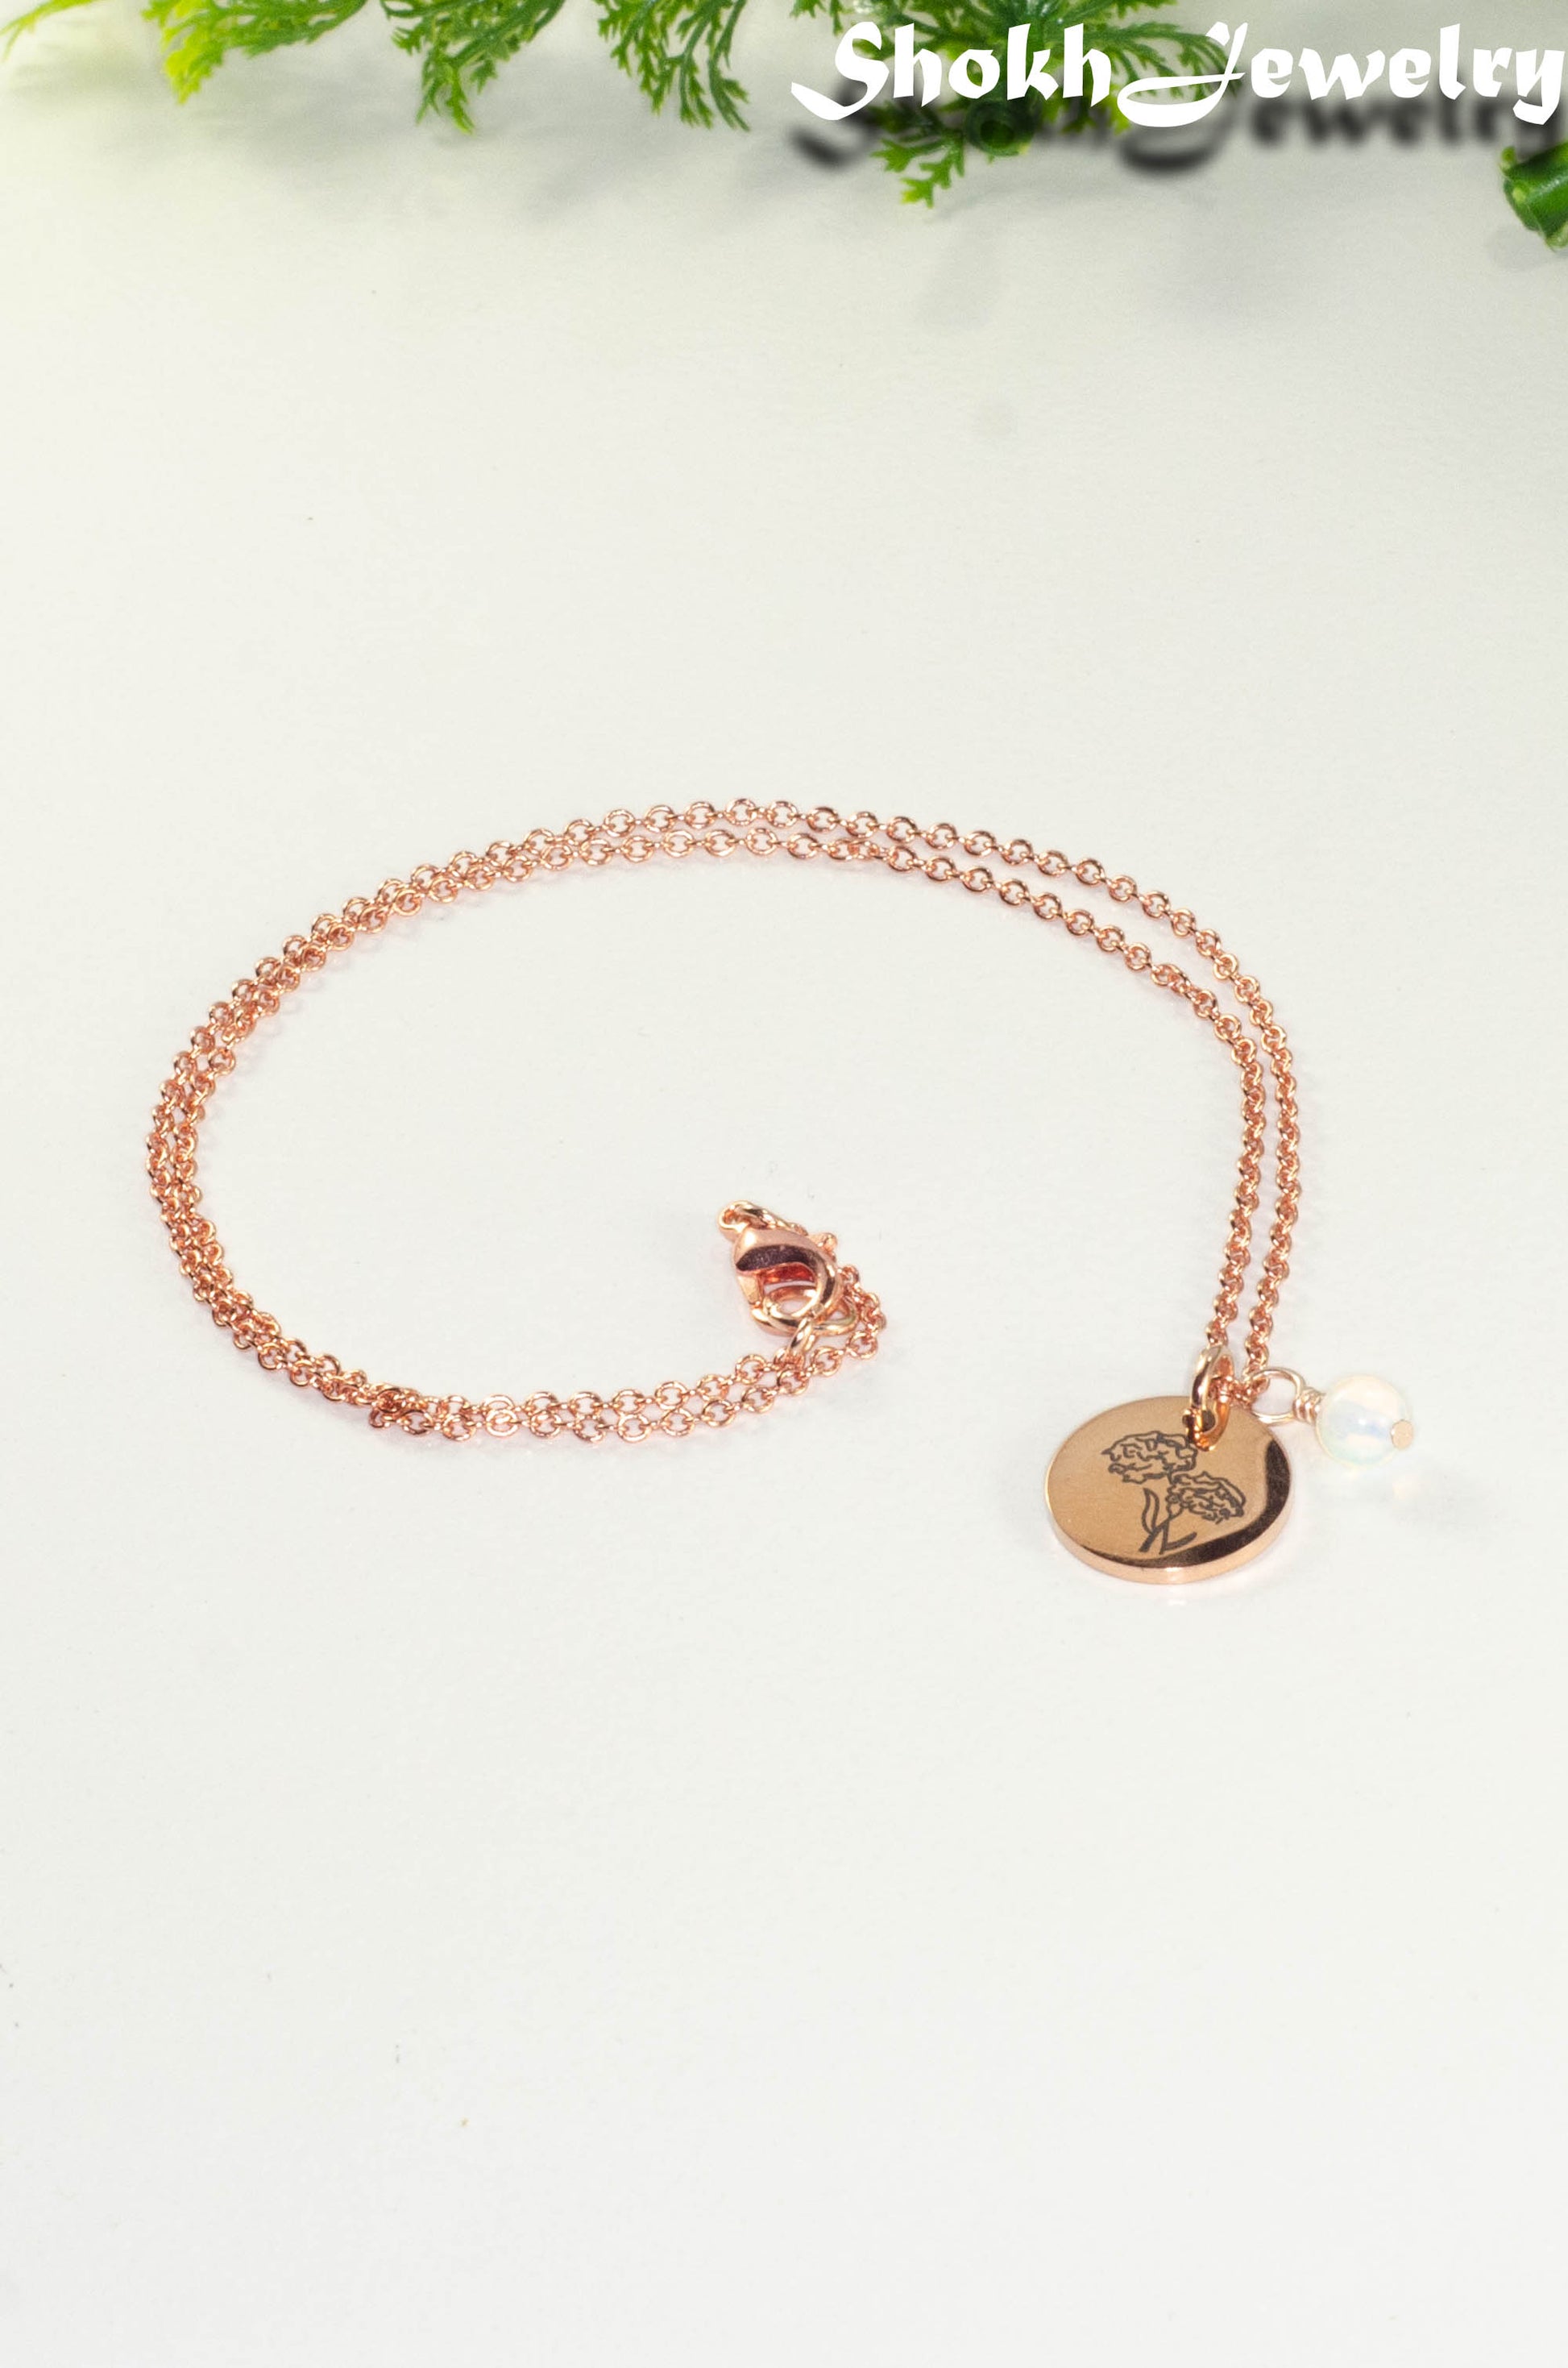 Rose Gold Plated October Birth Flower Necklace with White Opal Birthstone Pendant.